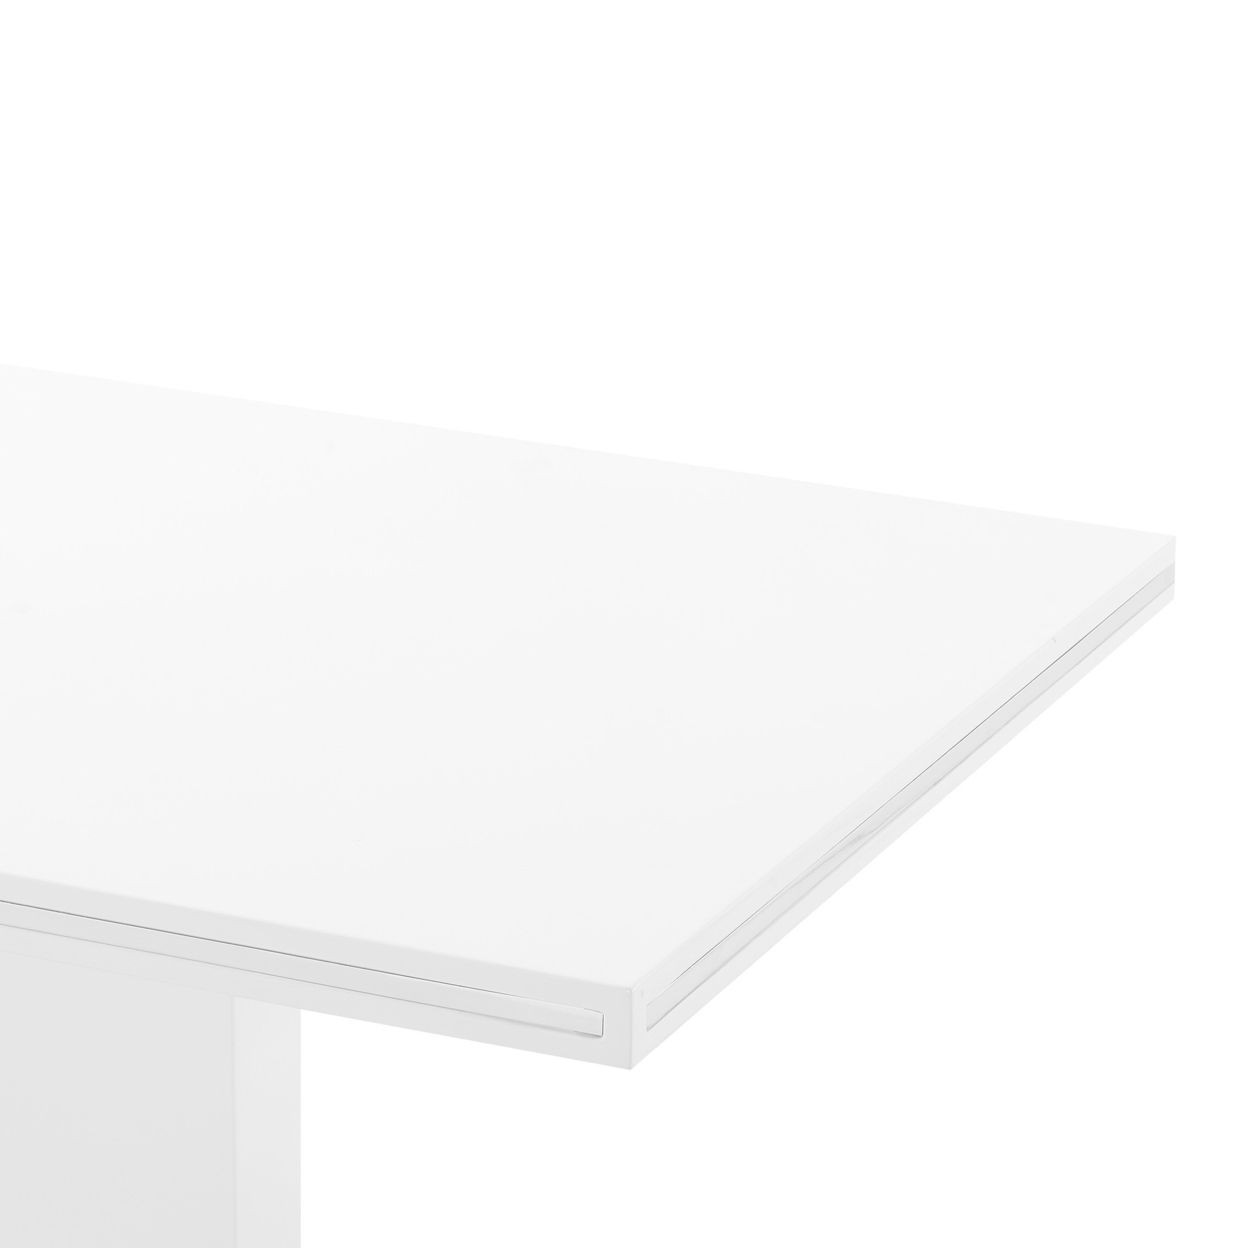 51 Inch Dining Table With Lacquer Coated Top And Metal Base, White- Saltoro Sherpi